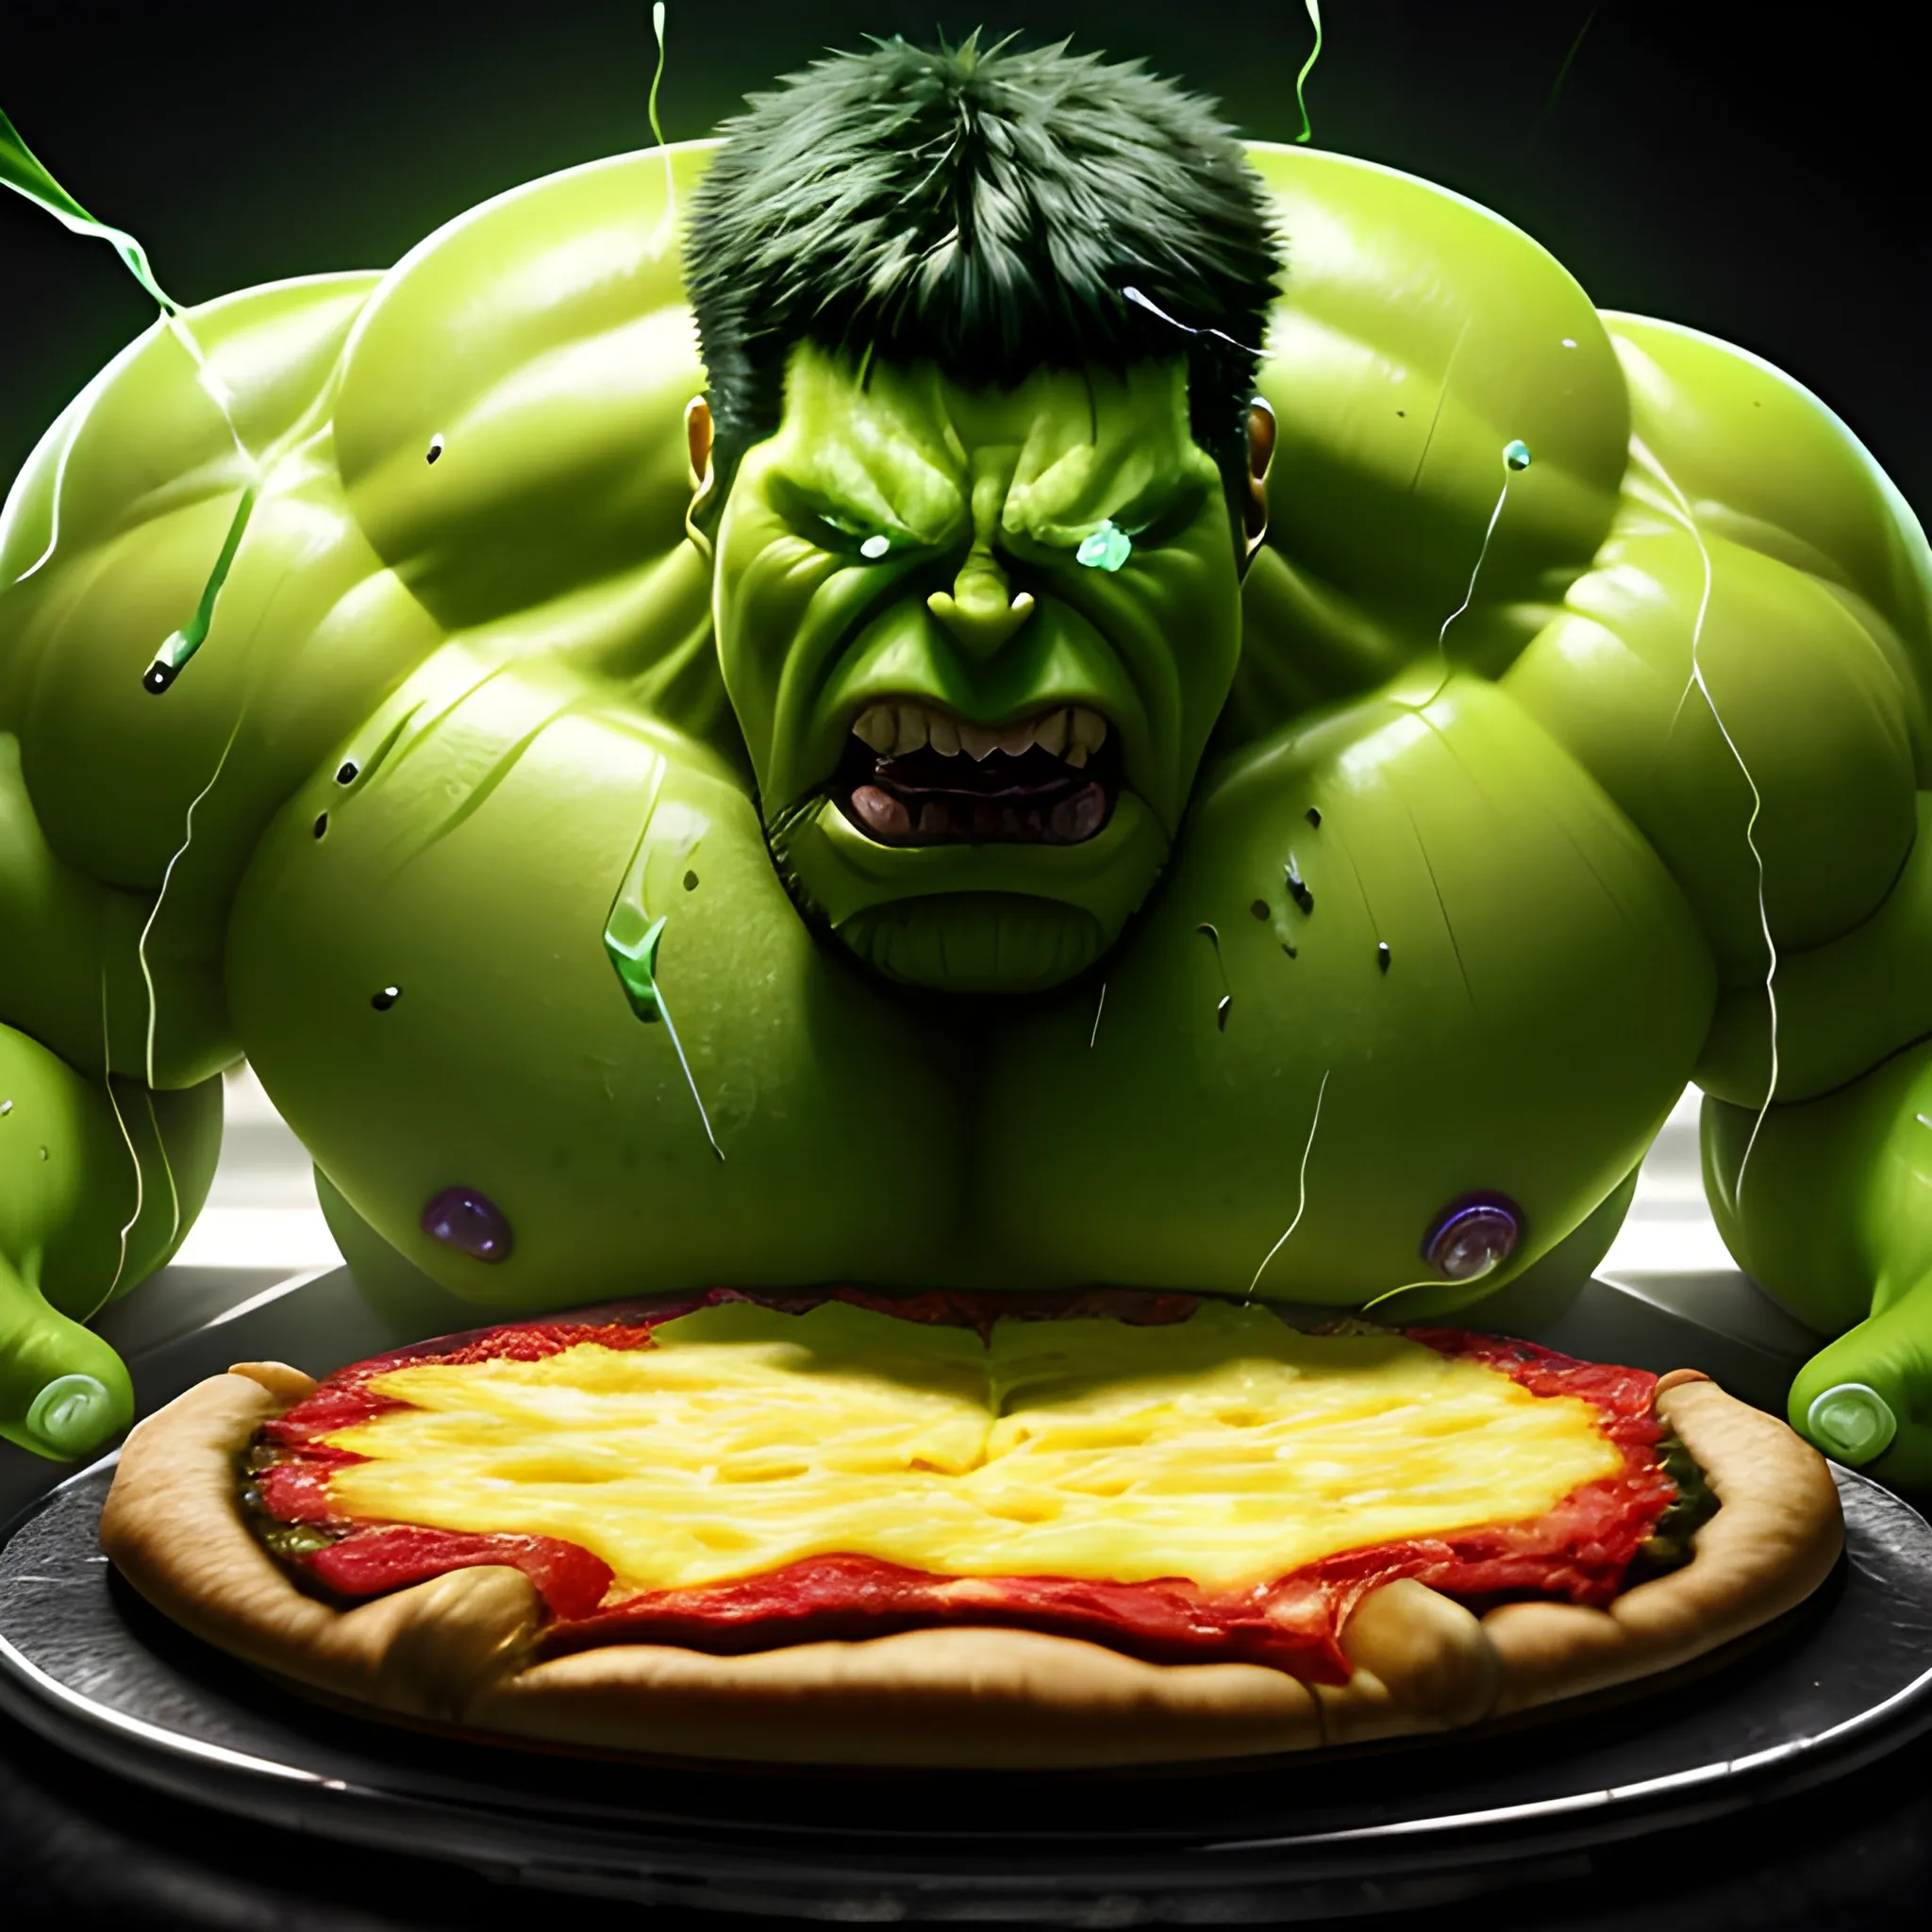 hyper-realistic, 4k image, green Hulk, taking a bite from a single slice of pizza, with cheese visibly dripping from the slice, Hulk should have subtle cybernetic enhancements,  soft studio lighting and edge highlights, luxurious cyberpunk background.